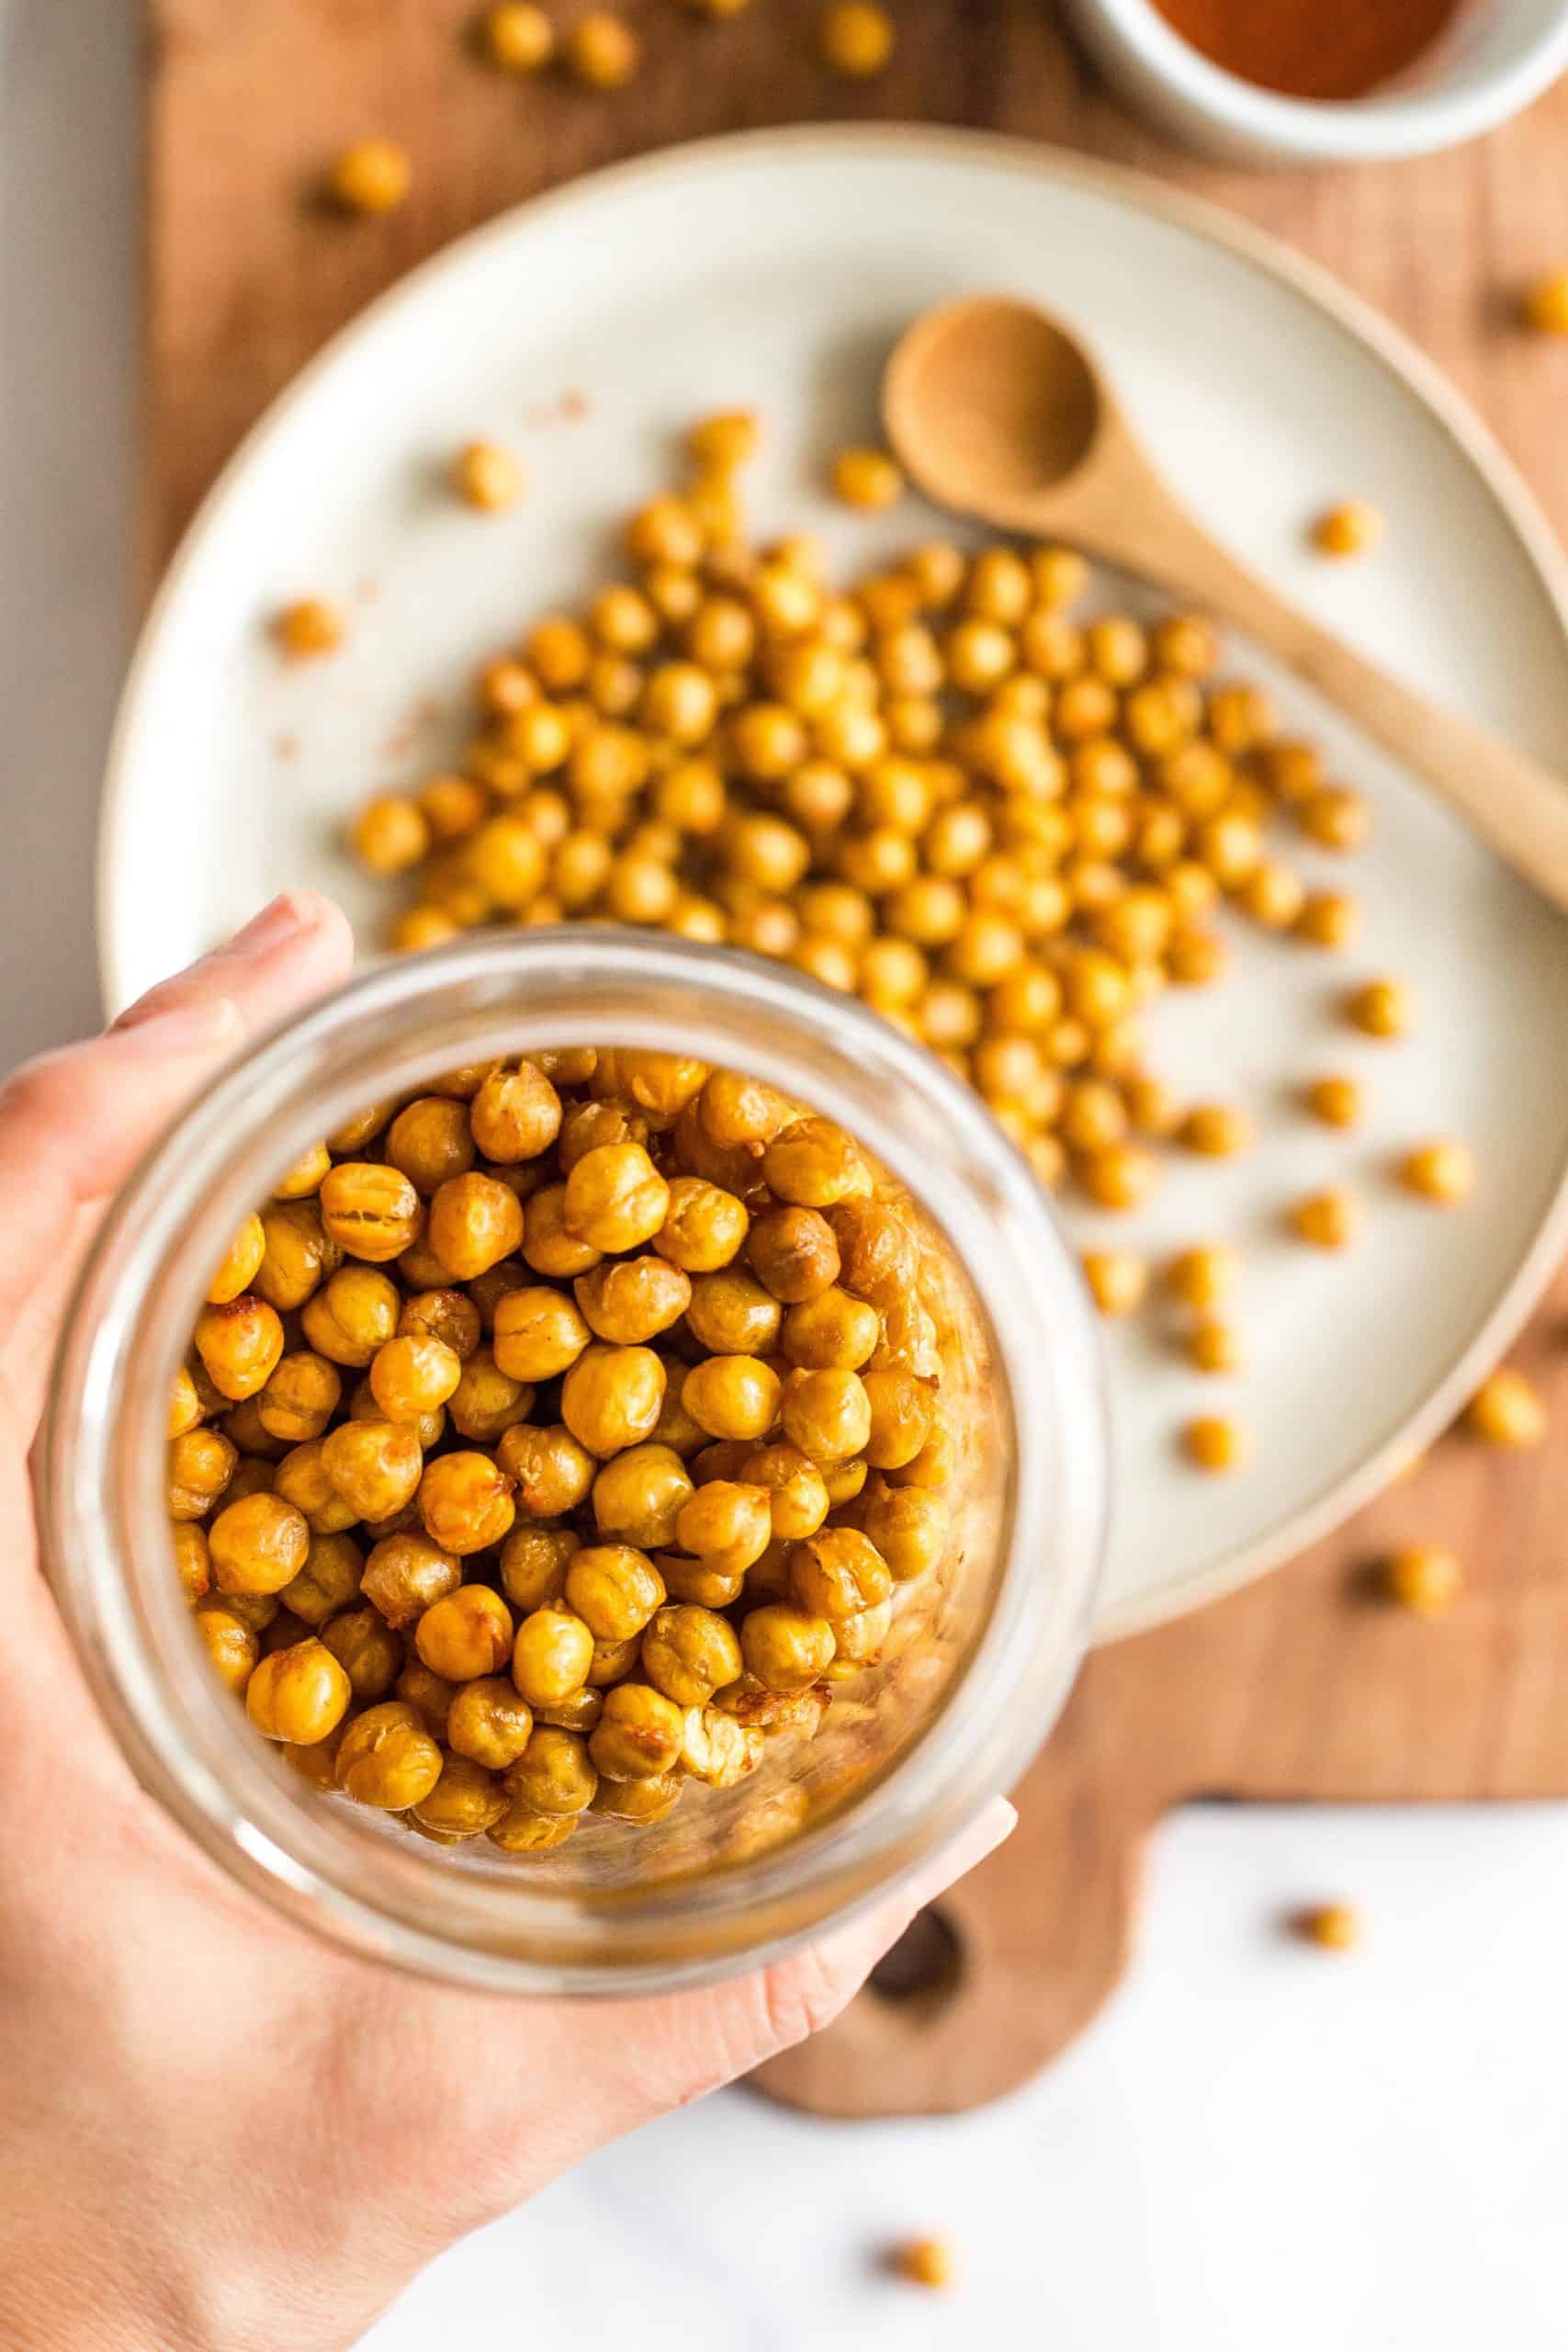 Holding up a jar of air fried chickpeas.